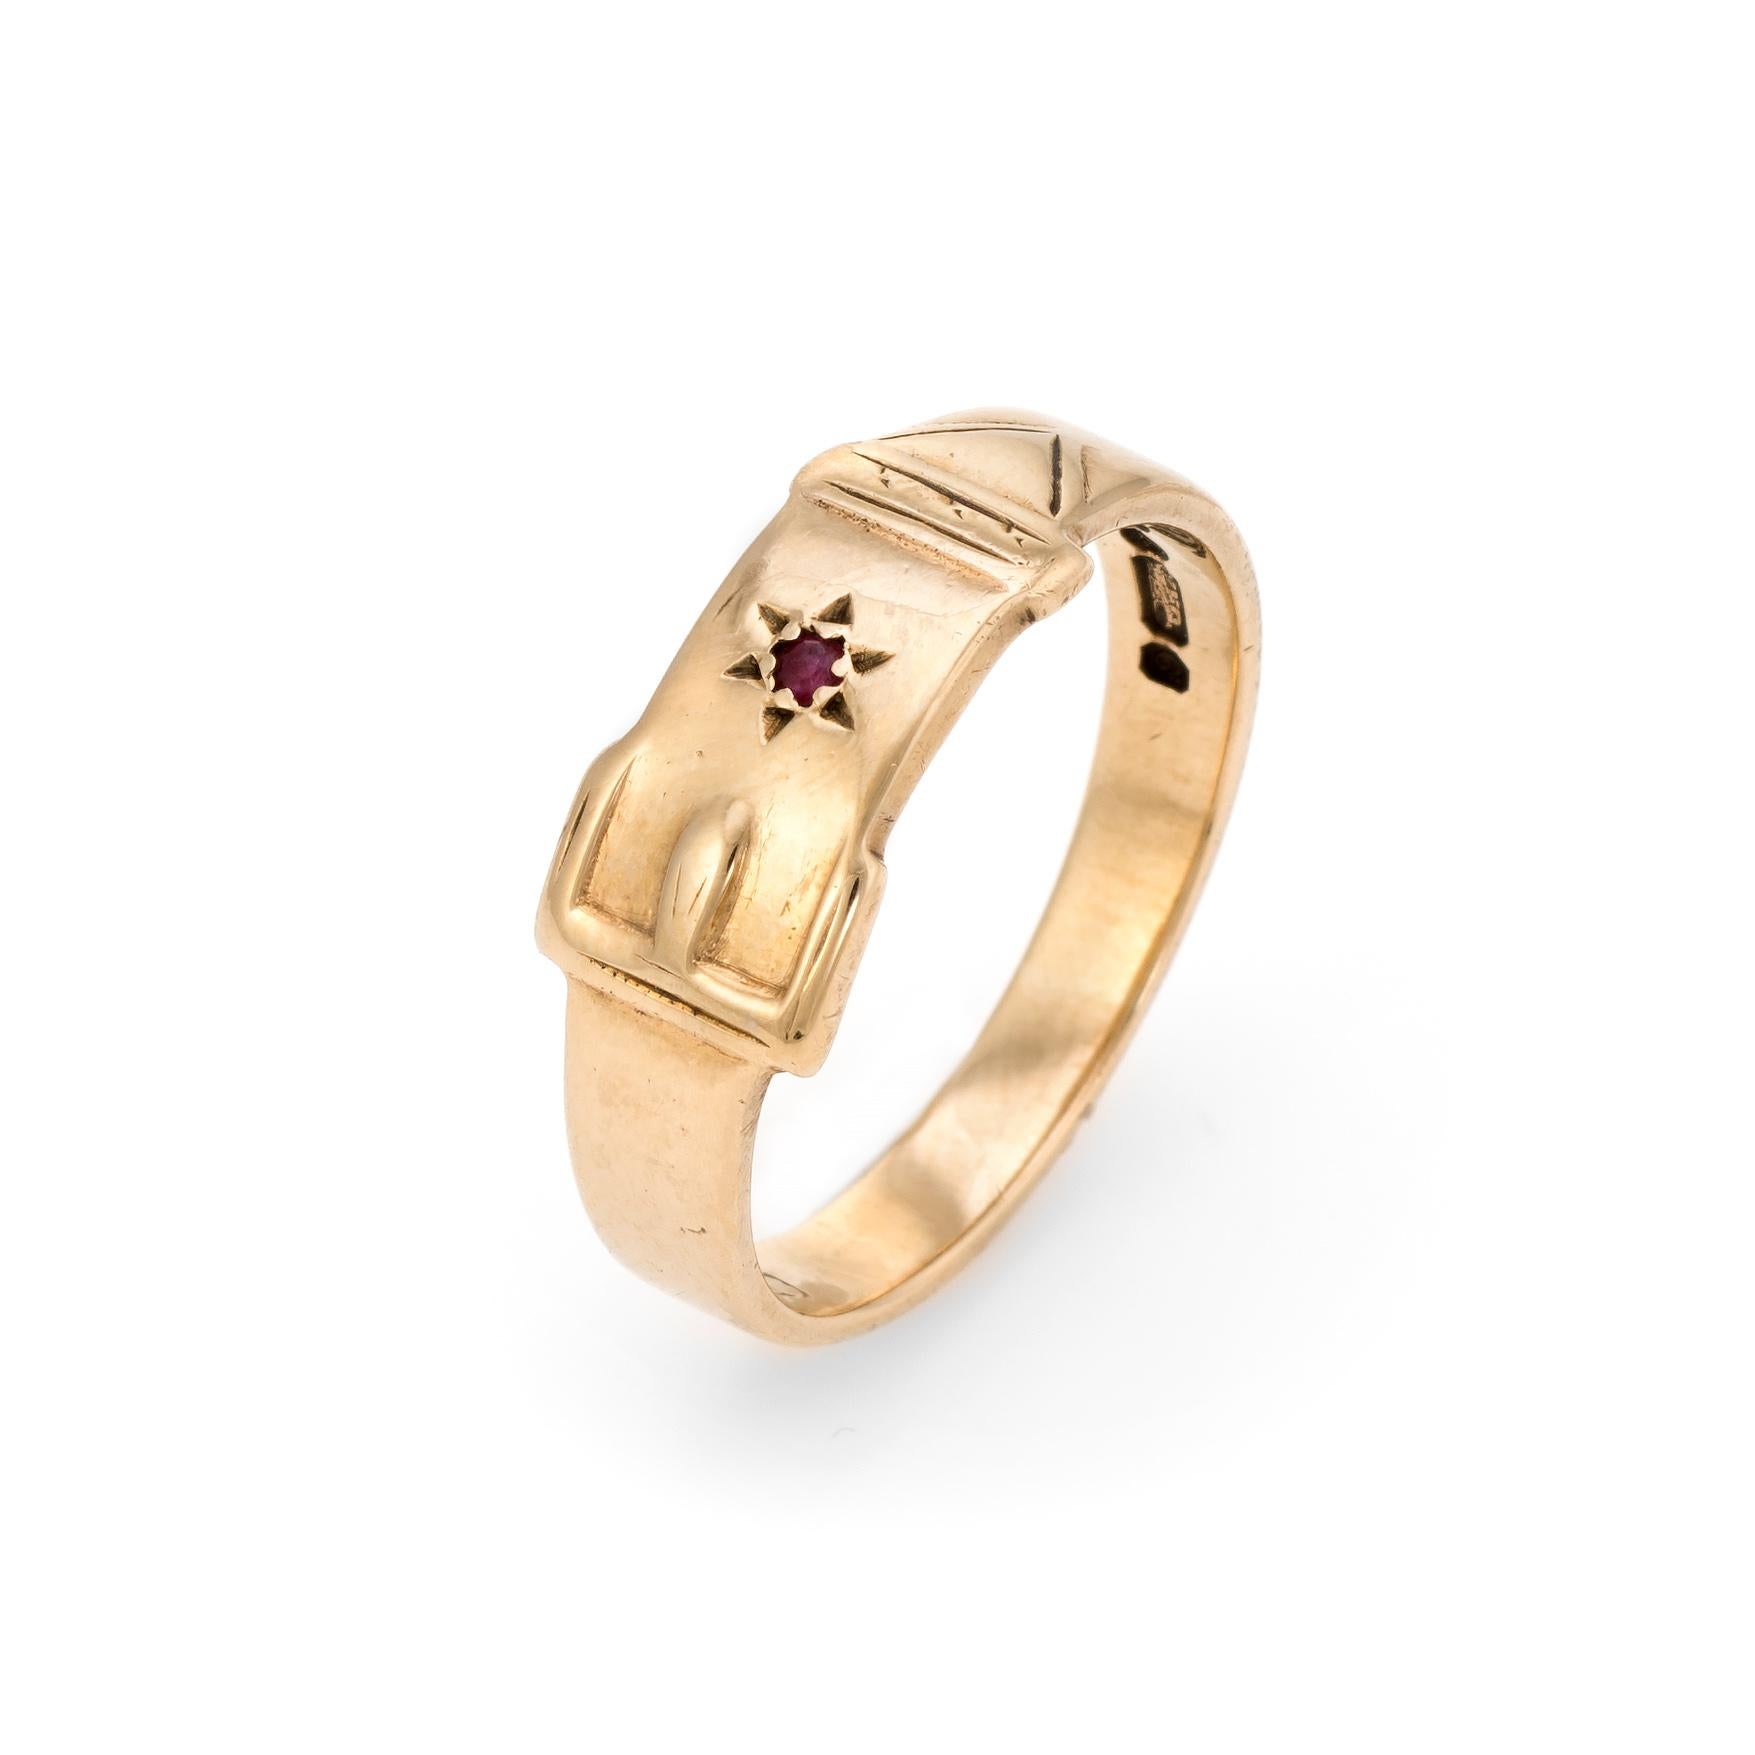 Finely detailed vintage buckle band, crafted in 9 karat yellow gold. 

One estimated 0.01 carat ruby is set into the band.

The buckle design has long been popular as a promise ring or love token. The clasped belt wraps around the finger,